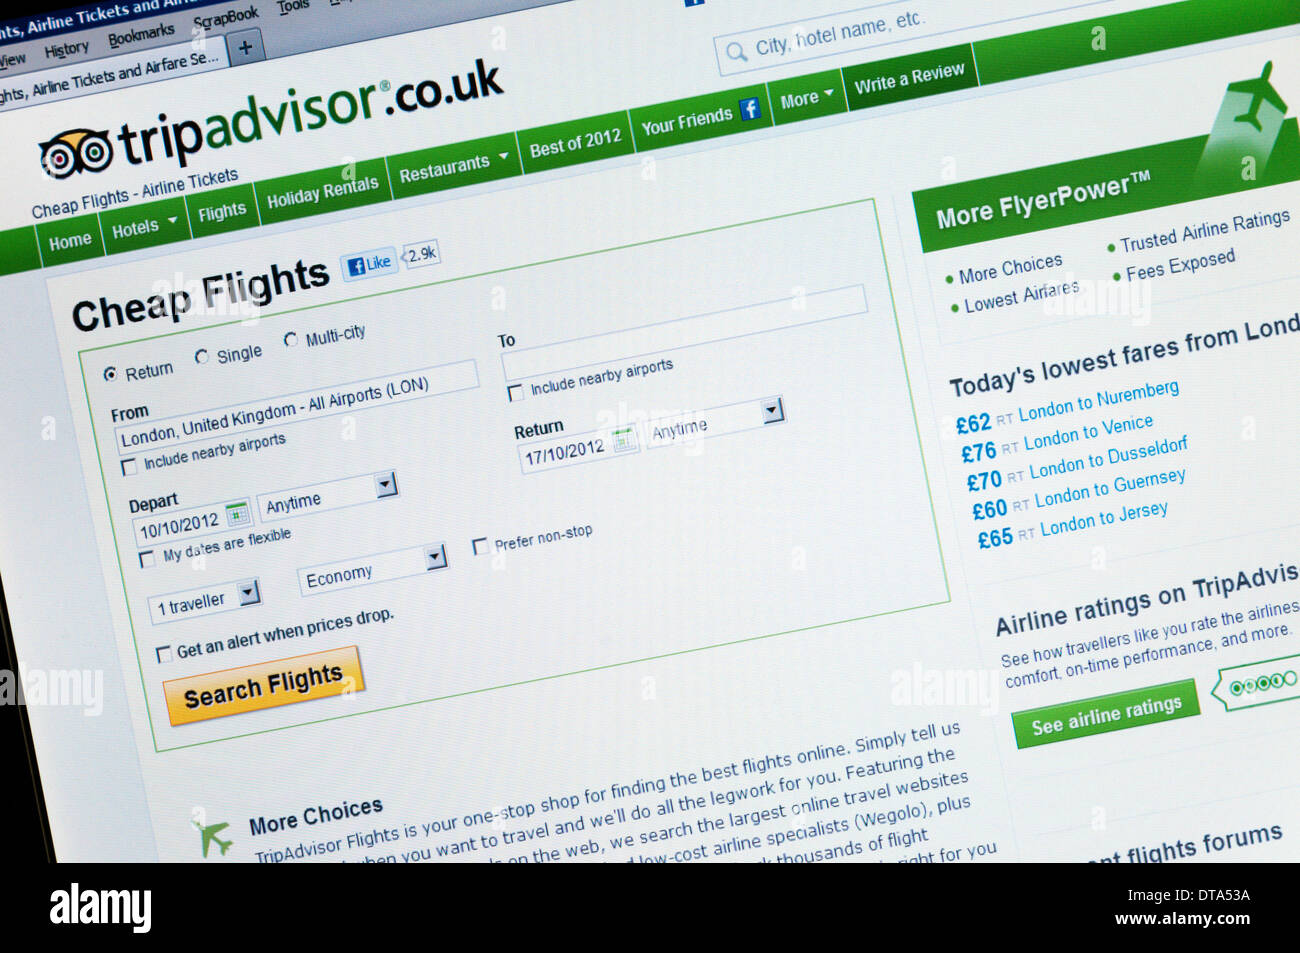 The UK site of the travel advice website tripadvisor, offering cheap flights from London. Stock Photo